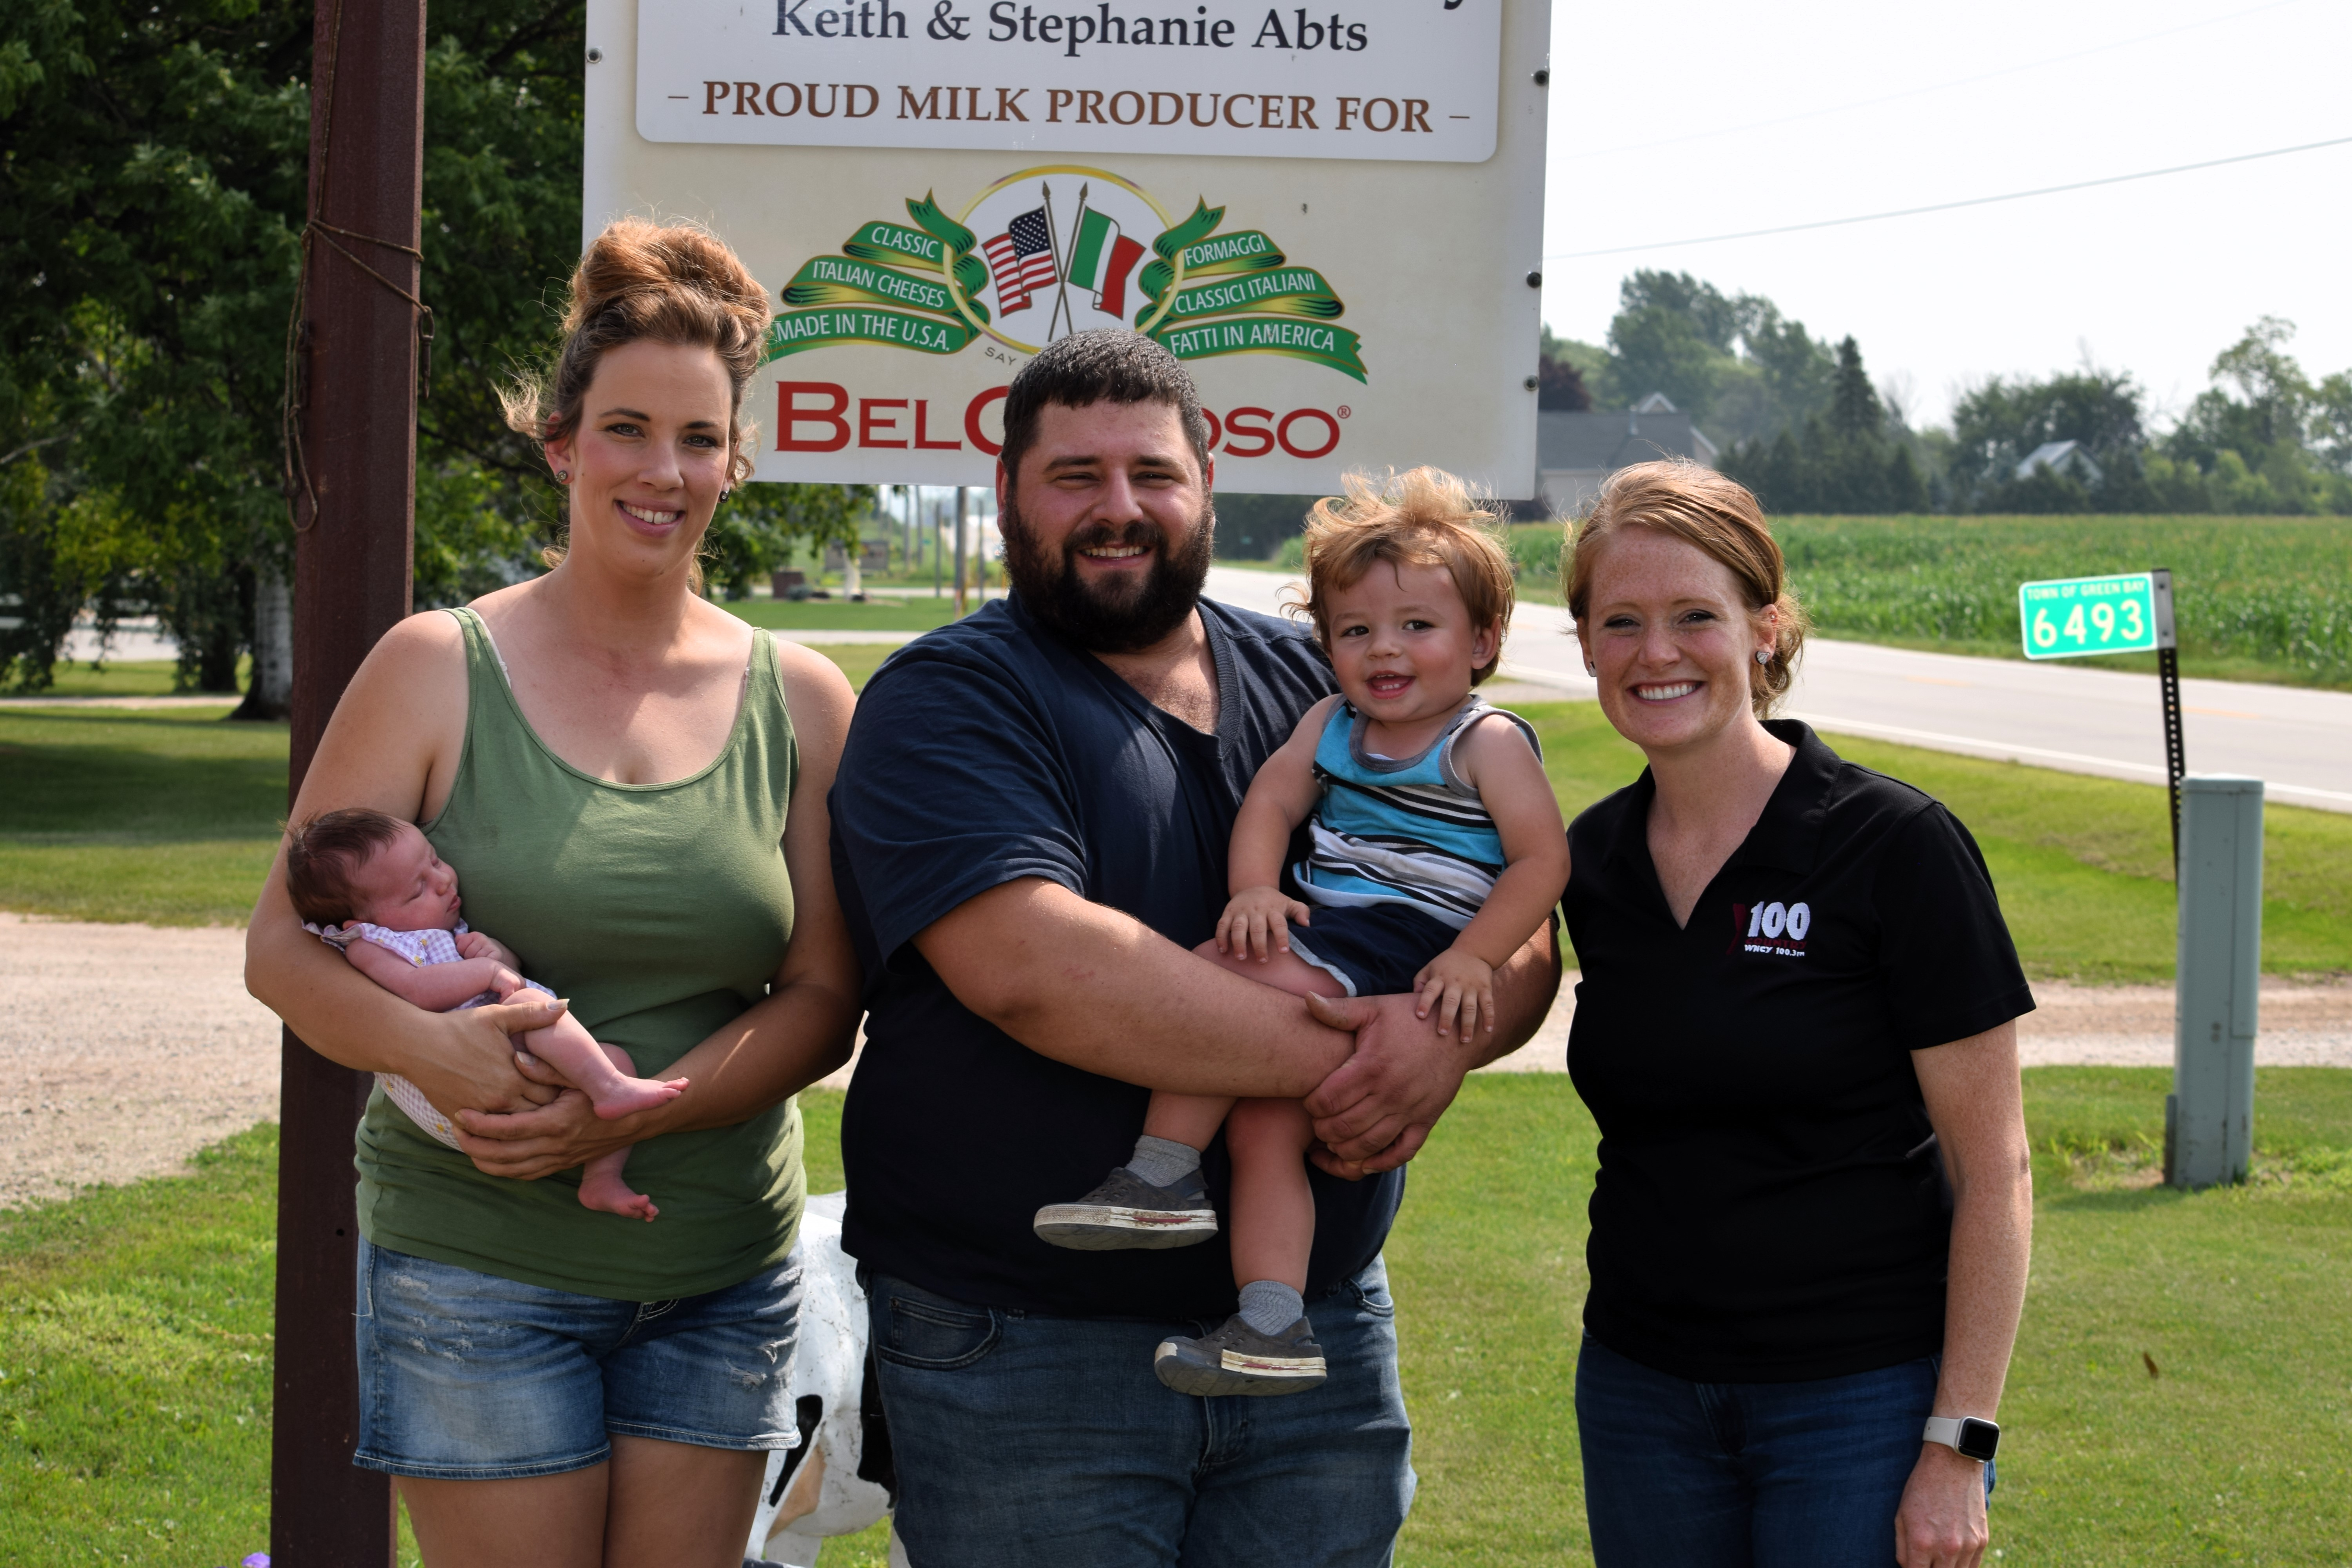 Learn about Abts Champion Dairy